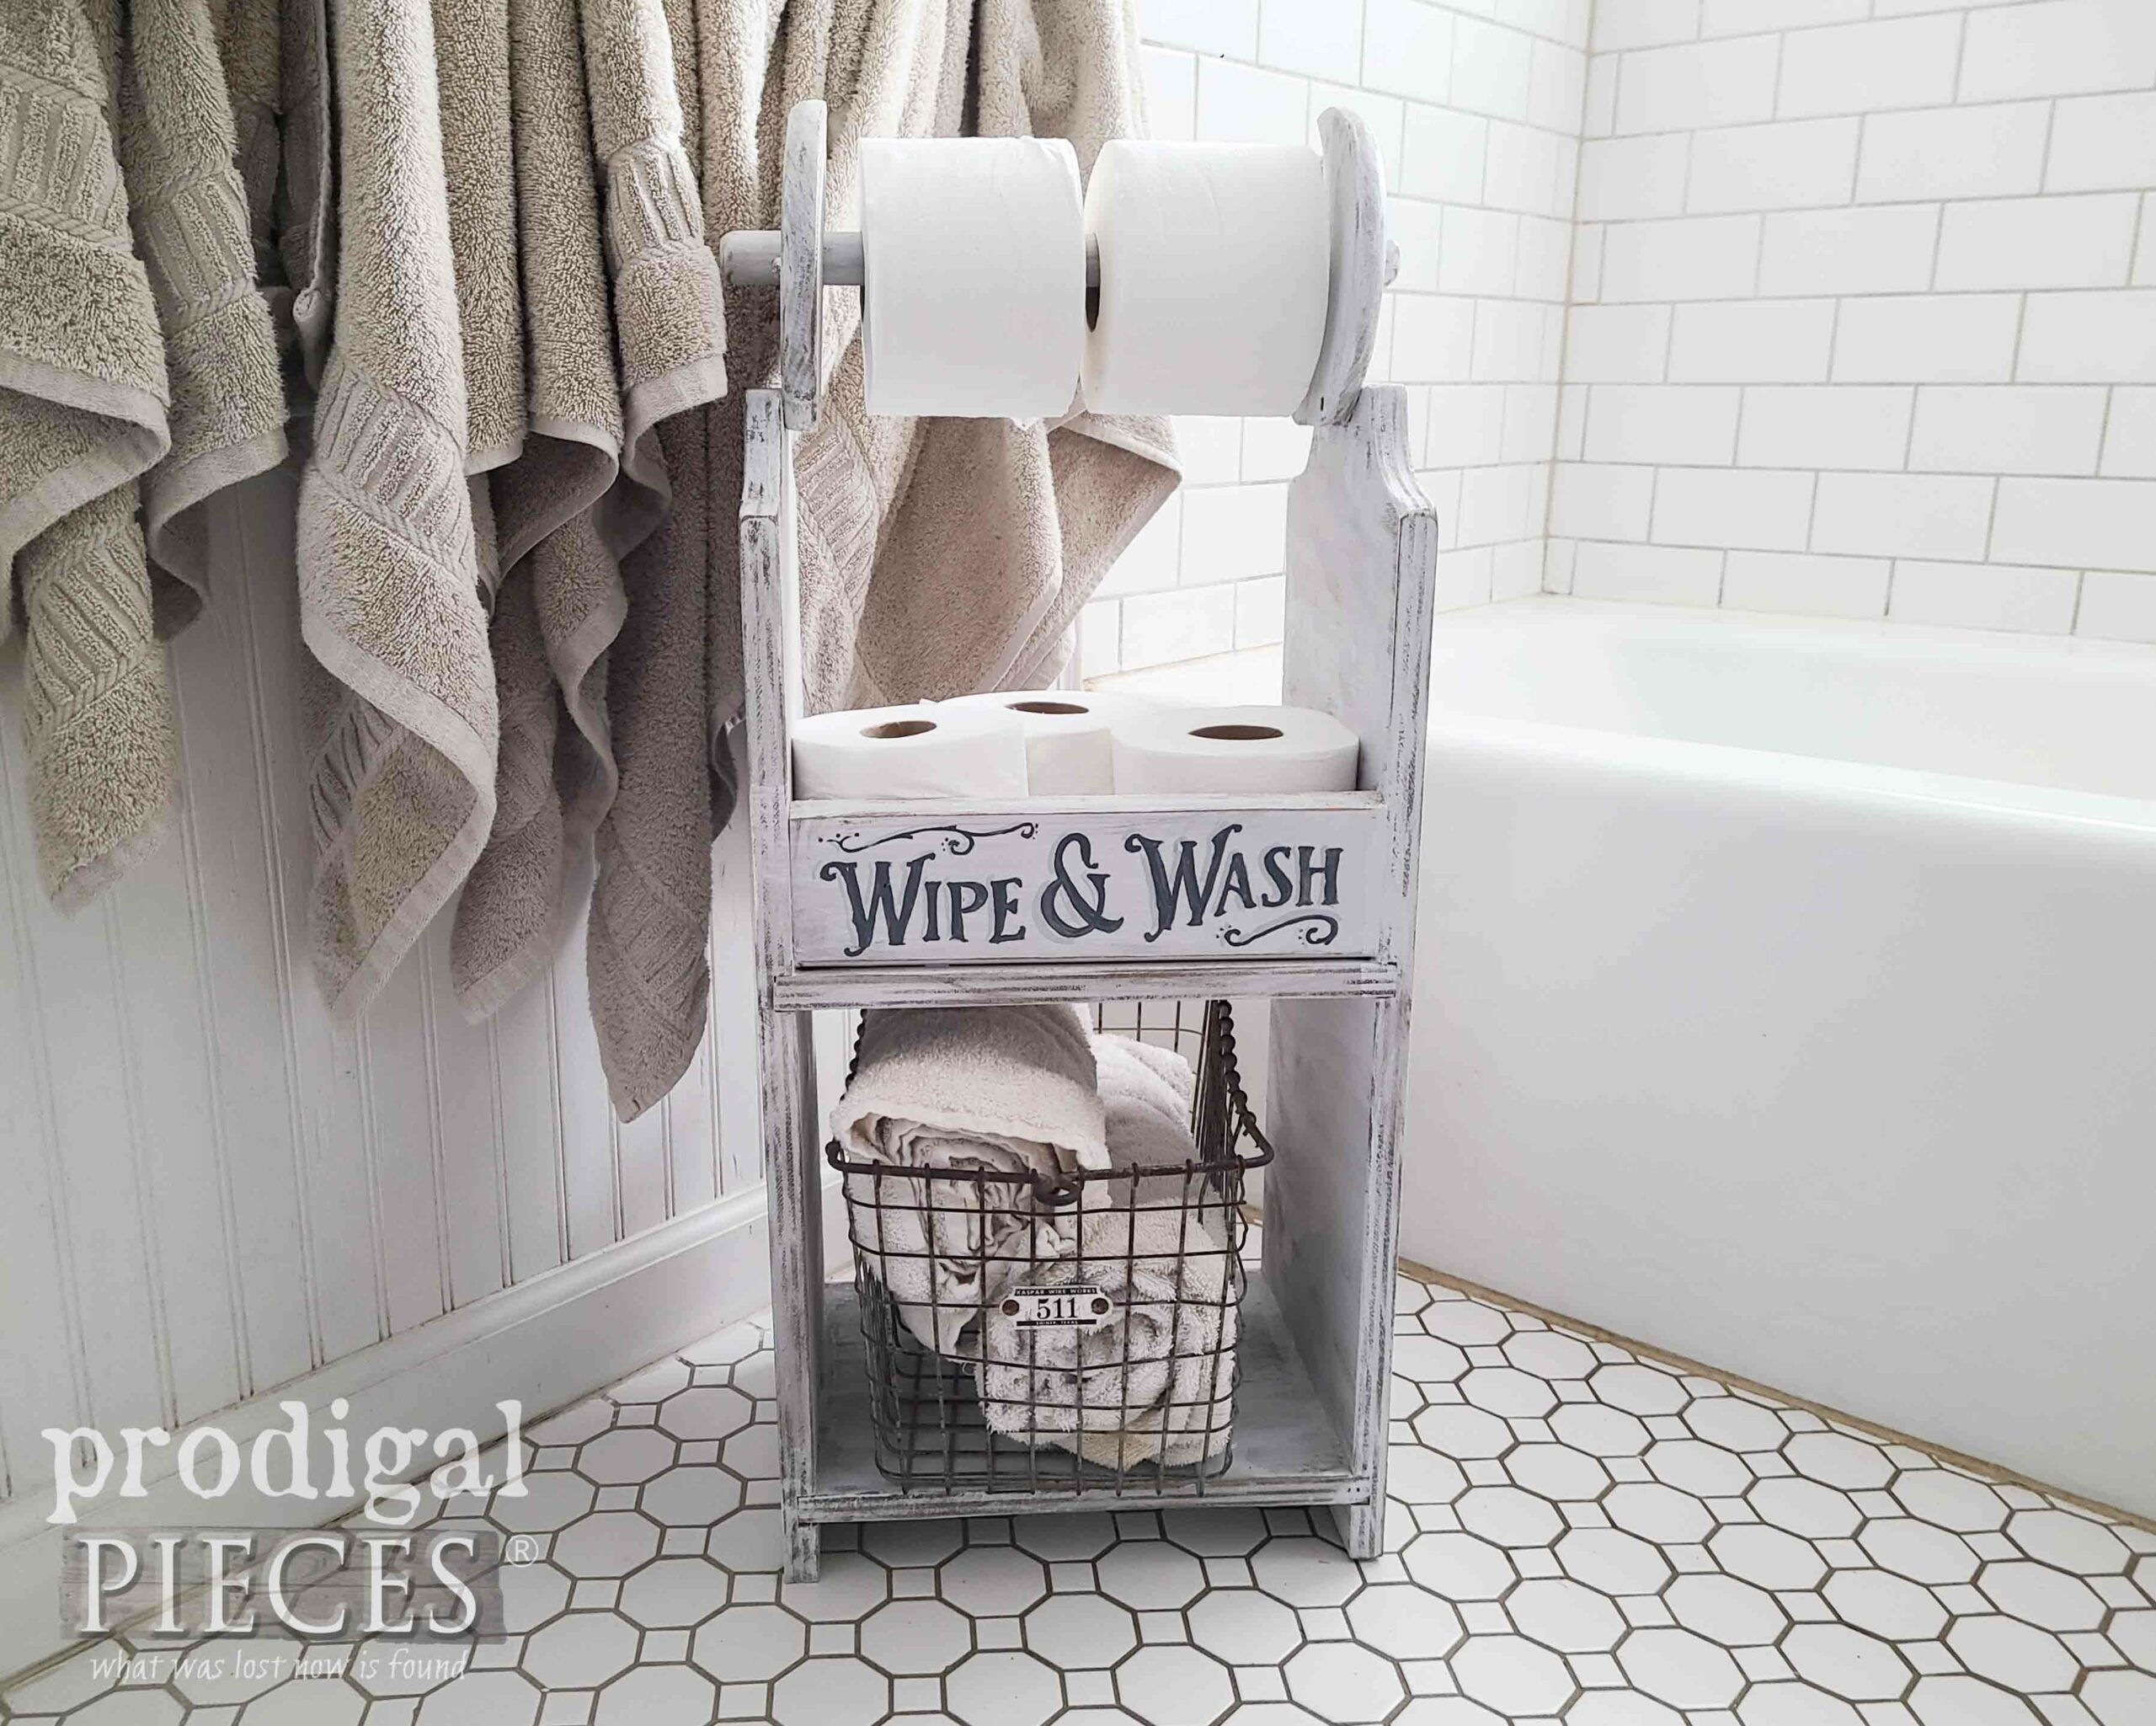 Cottage Style Farmhouse Toilet Paper Holder by Larissa of Prodigal Pieces | prodigalpieces.com #prodigalpieces #diy #upcycled #bathroom